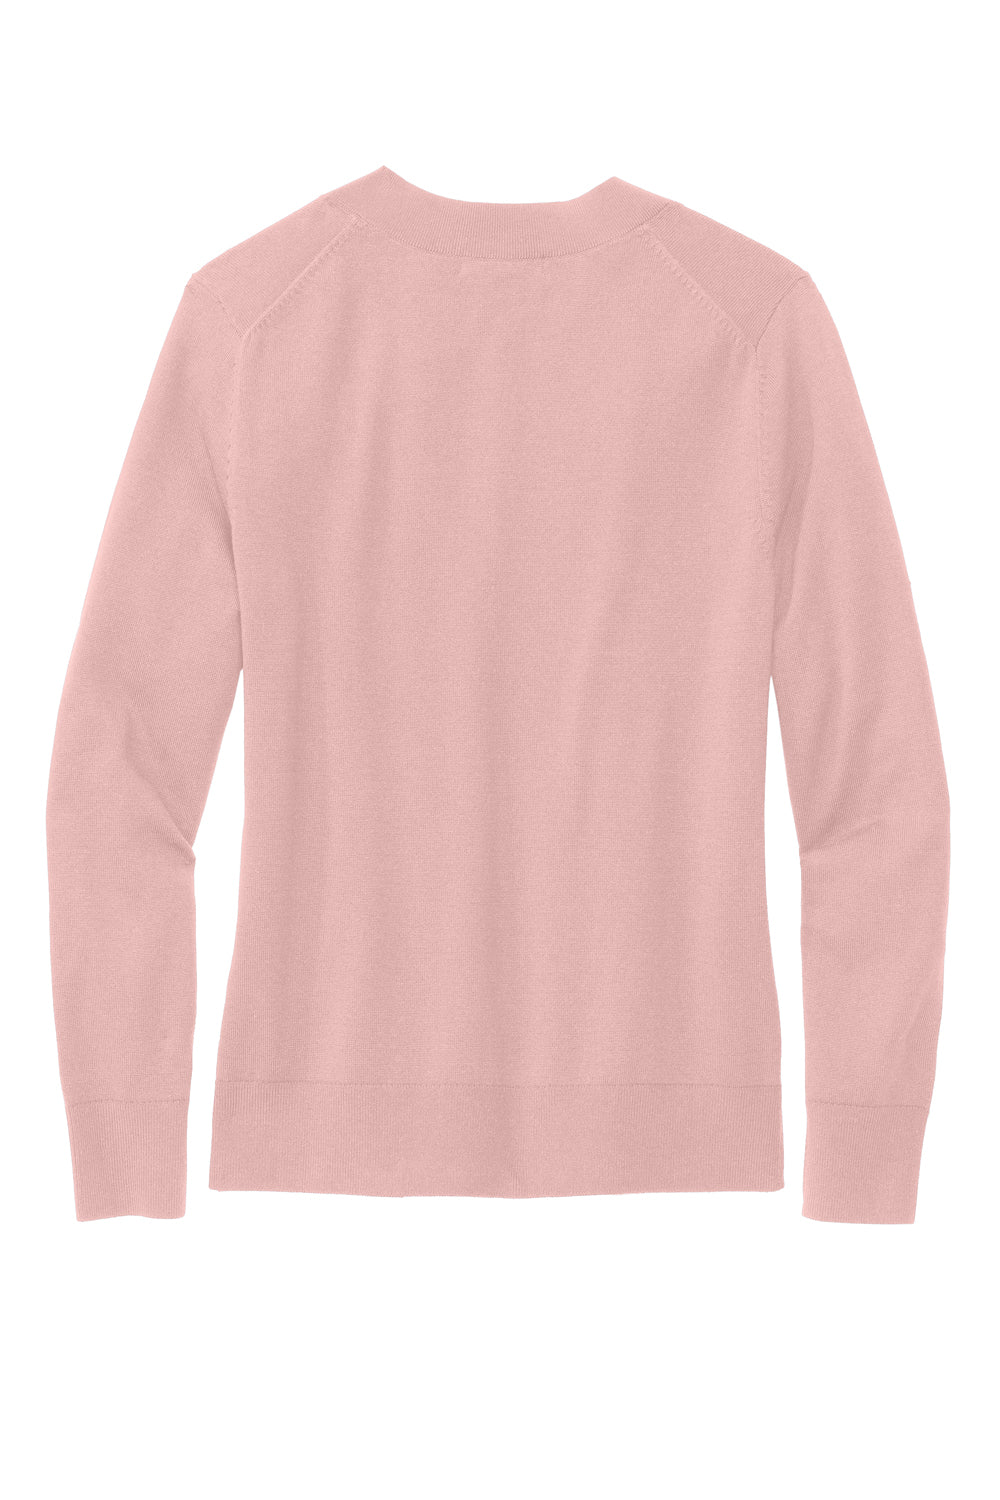 Brooks Brothers Womens Long Sleeve V-Neck Sweater Pearl Pink Flat Back